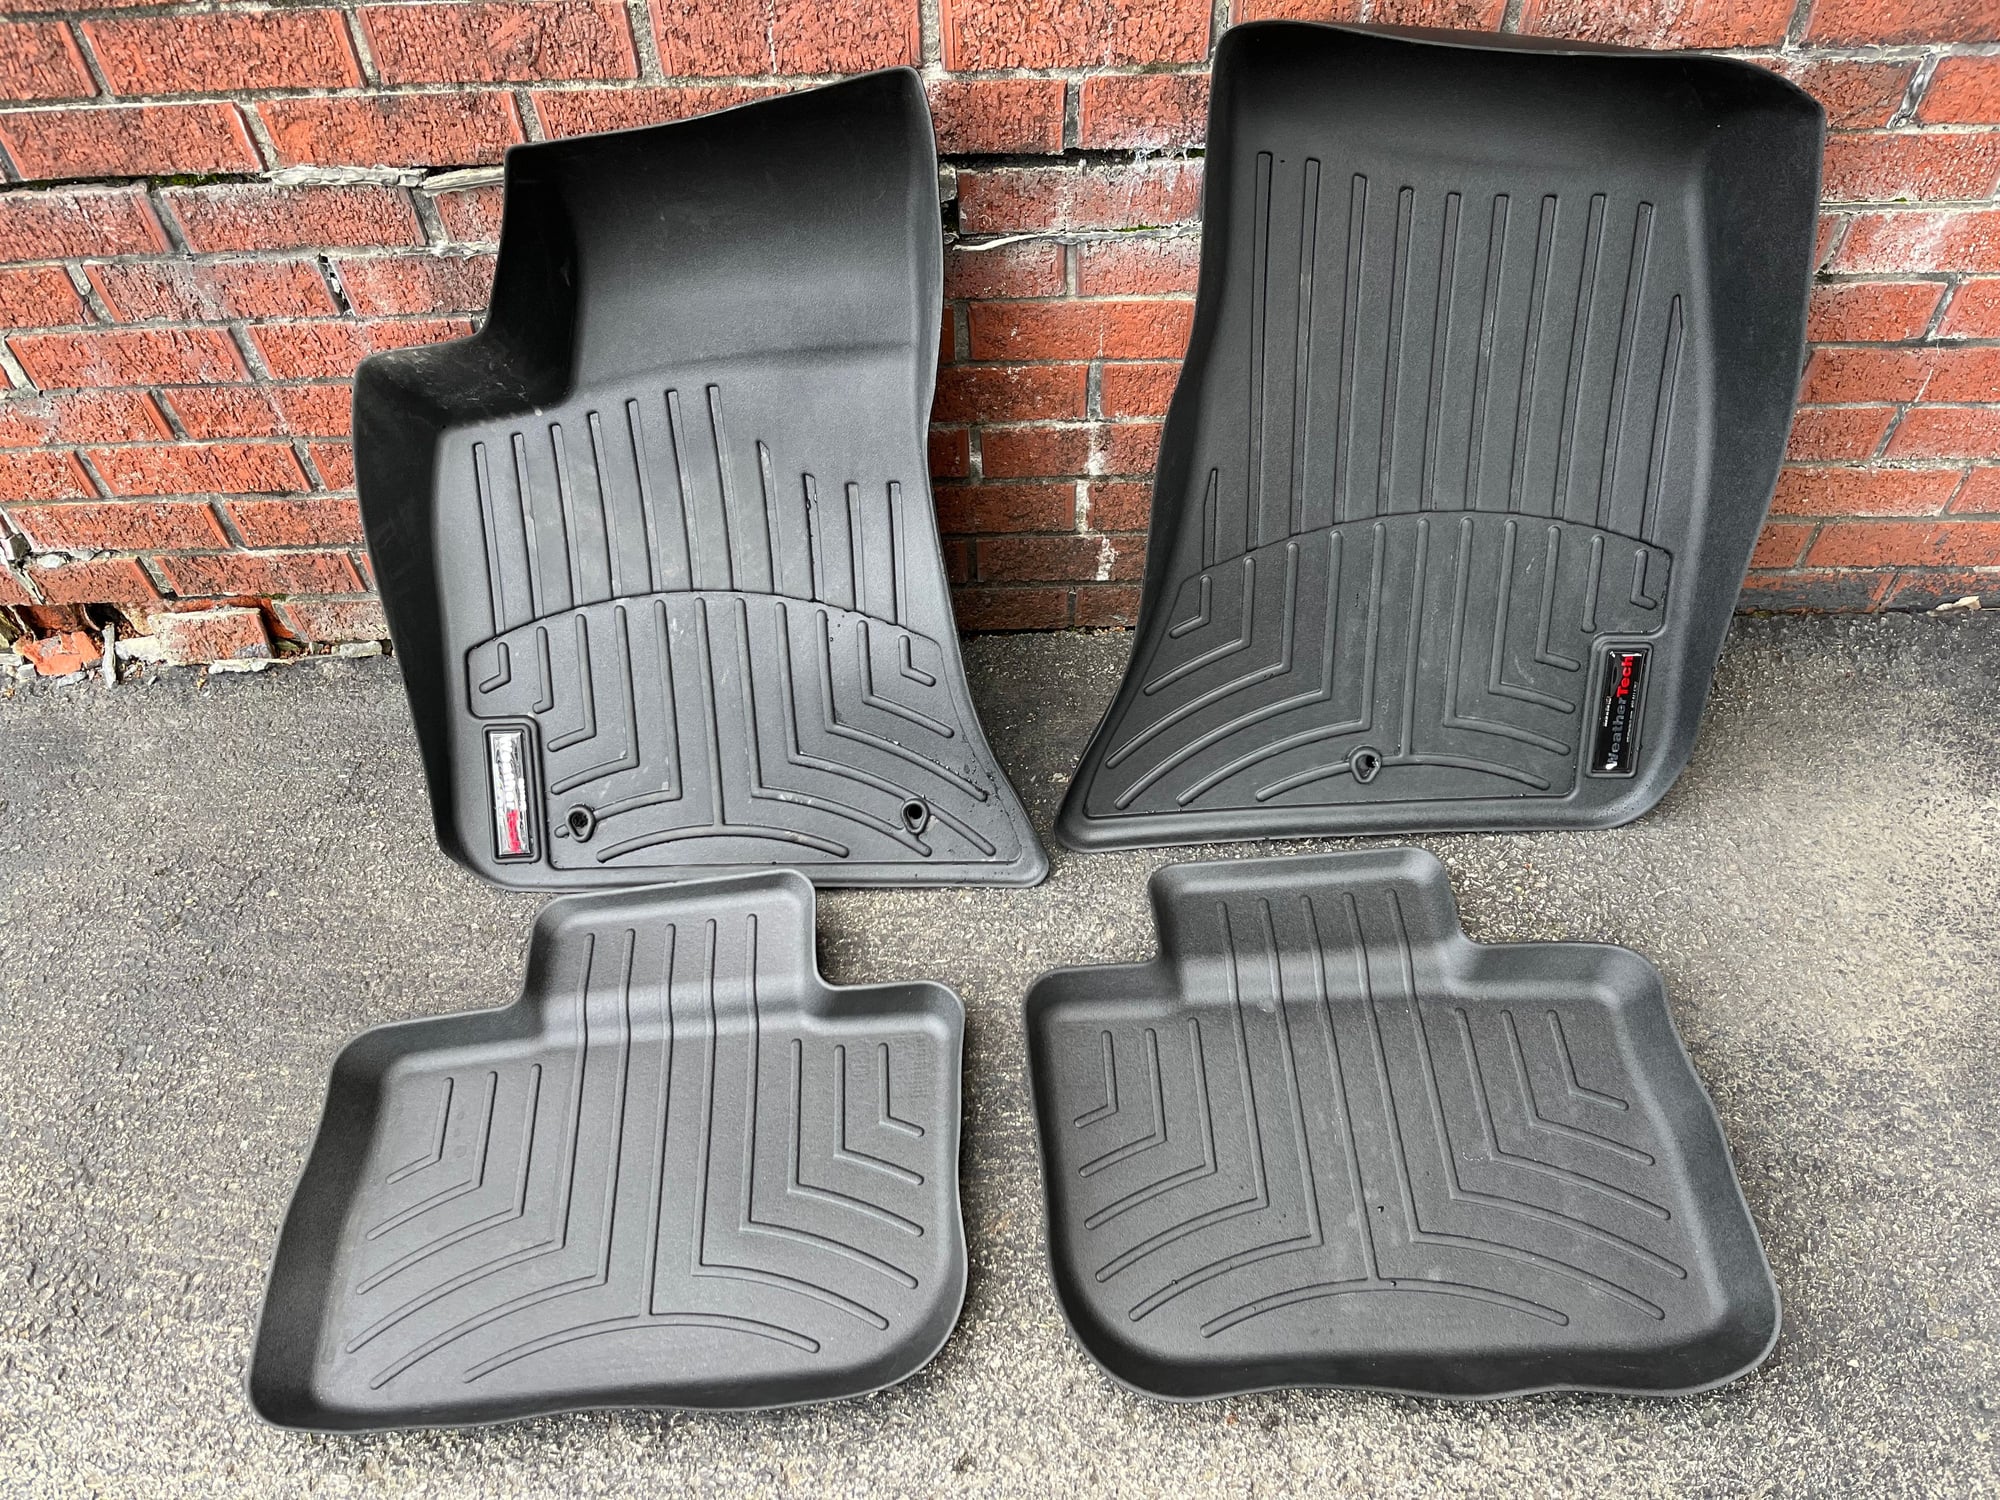 Interior/Upholstery - Weathertech mats and cover - Used - 2020 to 2022 Chrysler 300 - Greensburg, PA 15601, United States